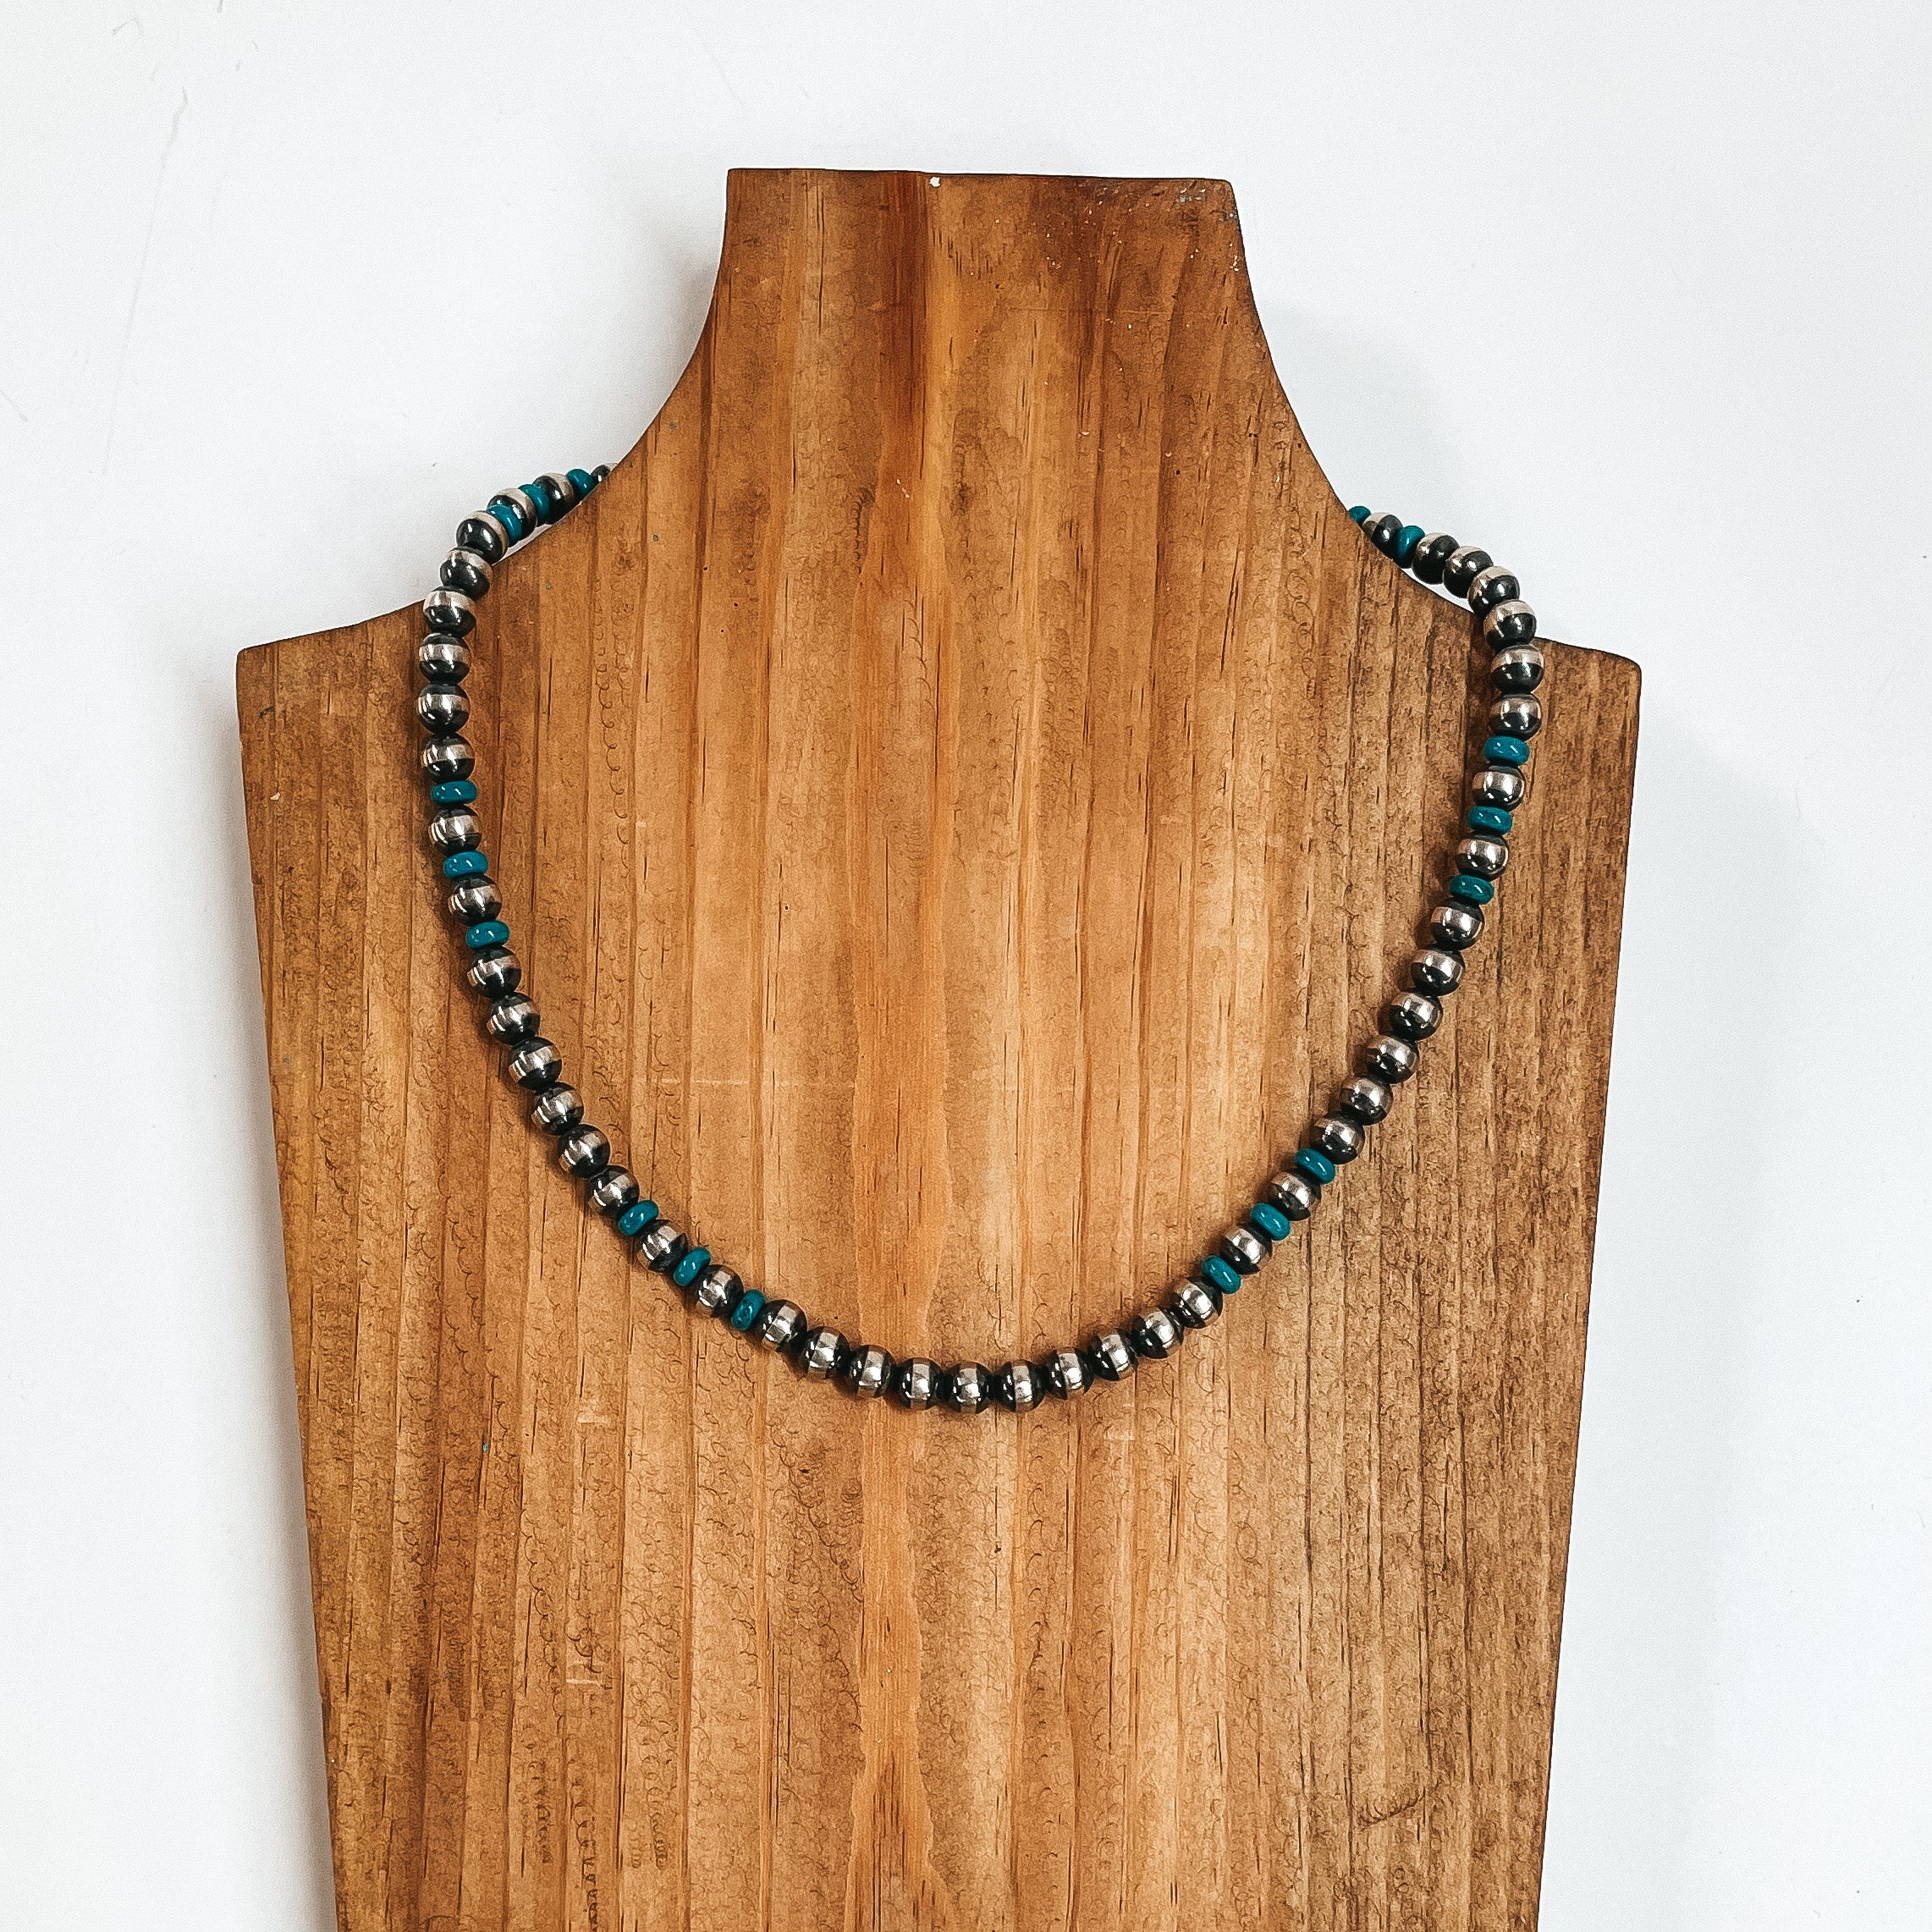 Navajo | Navajo Handmade 7mm Navajo Pearls Necklace with Turquoise Stones - Giddy Up Glamour Boutique